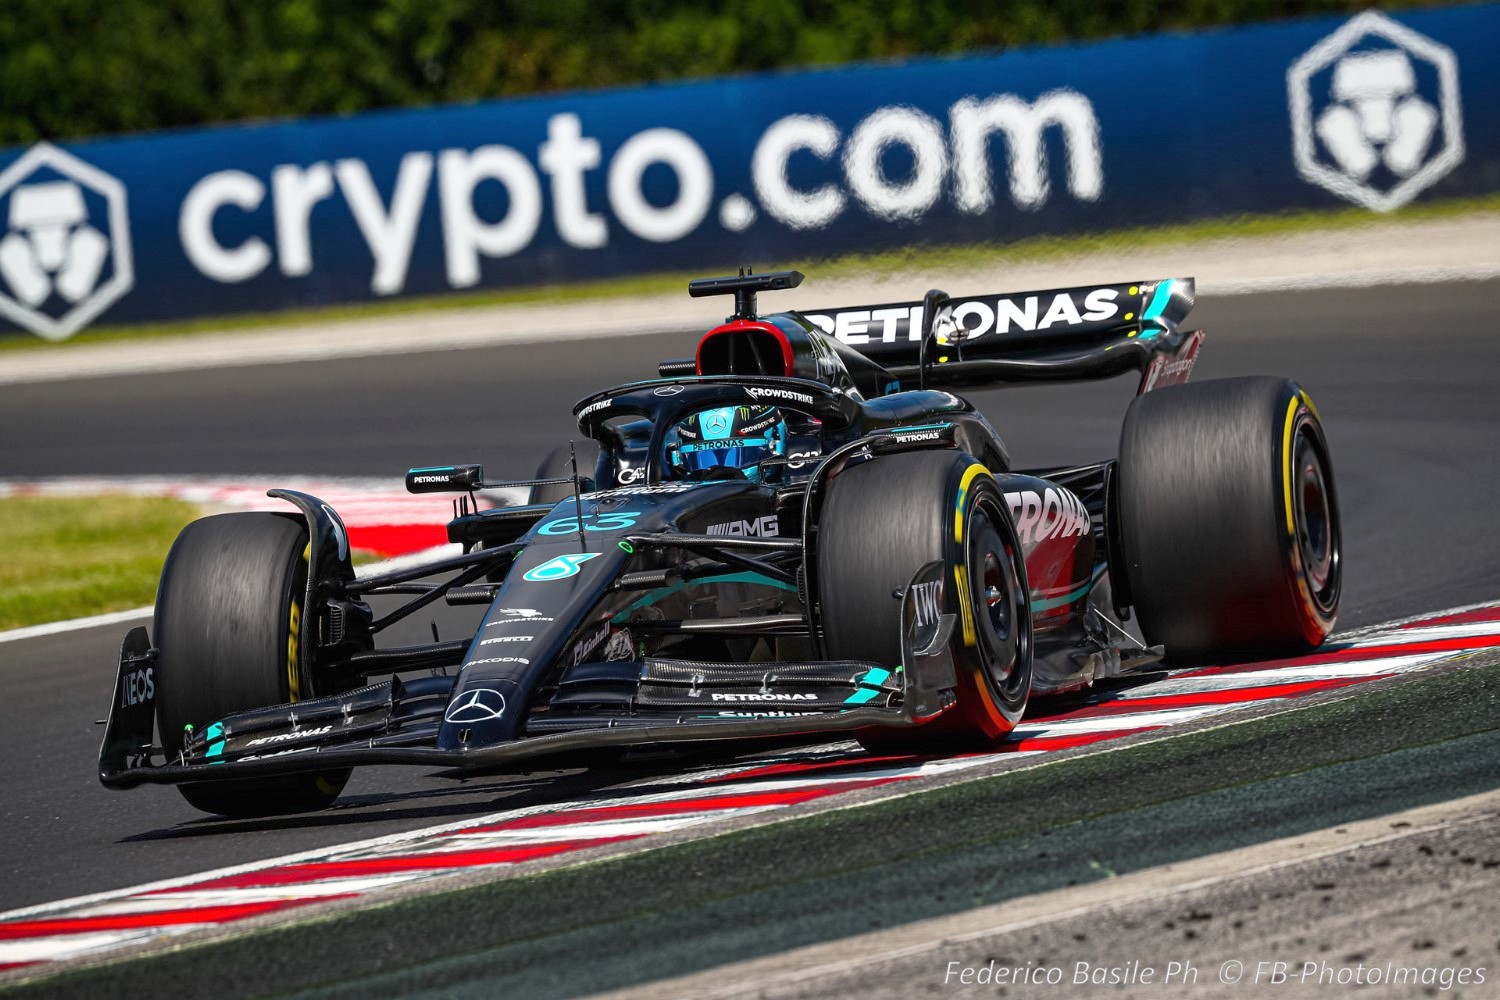 #63 George Russell, (GRB) AMG Mercedes Ineos during the Hungarian GP, Budapest 20-23 July 2023 at the Hungaroring, Formula 1 World championship 2023.